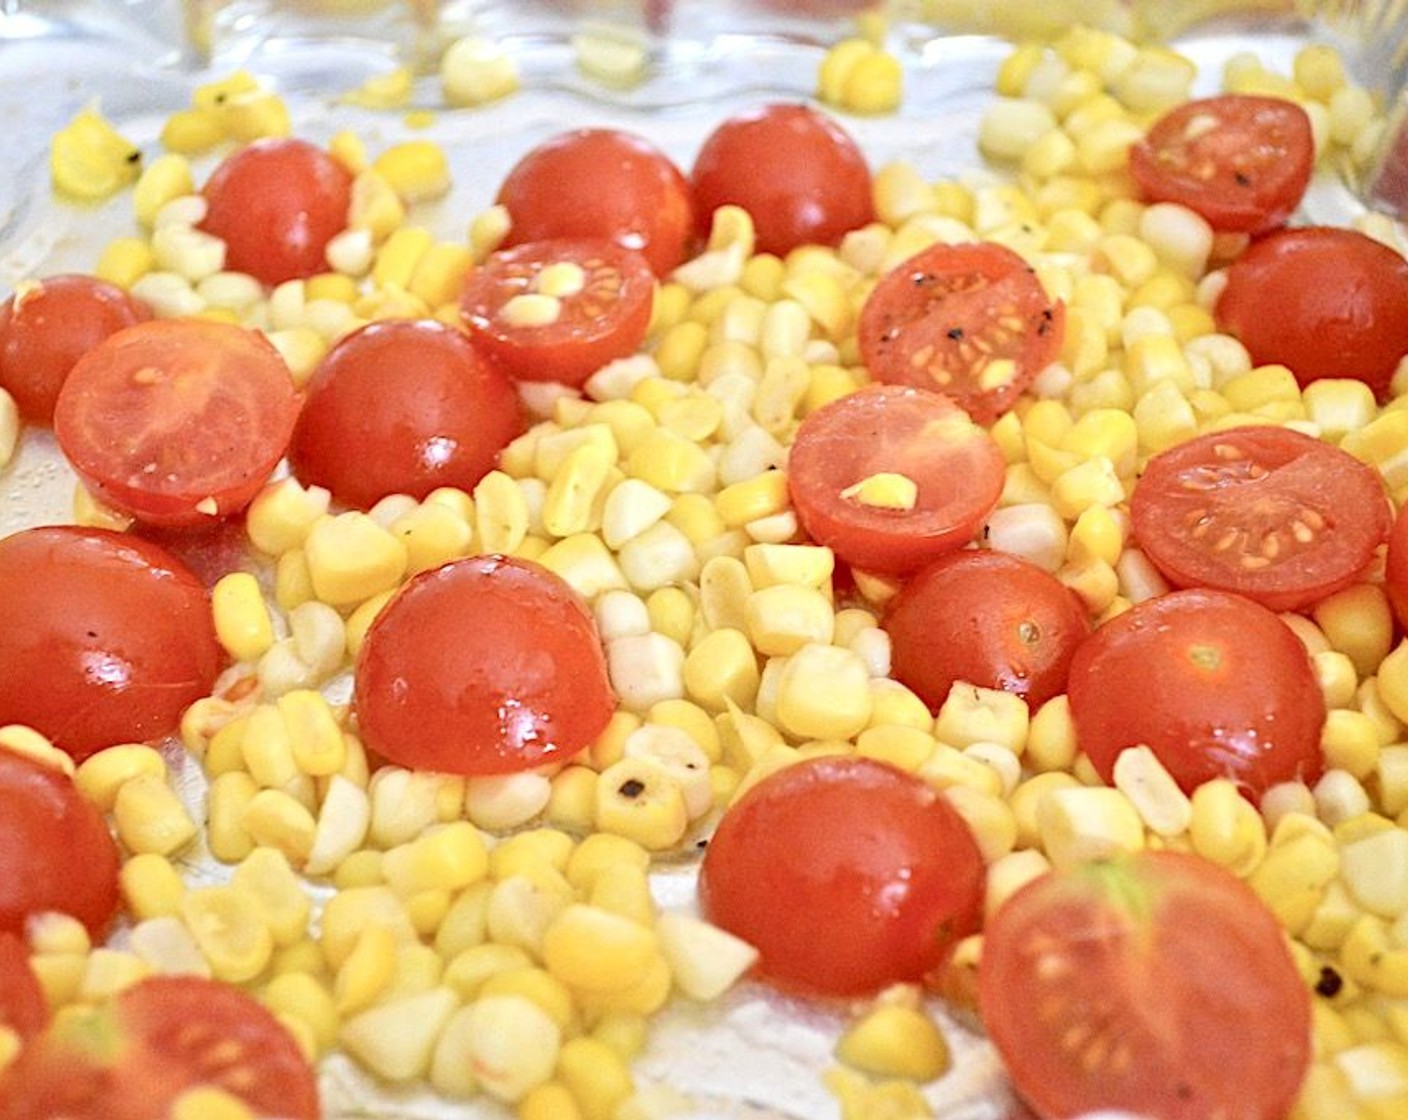 step 2 Get out a baking dish and combine the Corn (1 ear), Cherry Tomatoes (12), Salt (1 pinch), Ground Black Pepper (1 pinch), and Olive Oil (1 dash). Stir it all together thoroughly. Let them roast in the oven for 10 minutes.